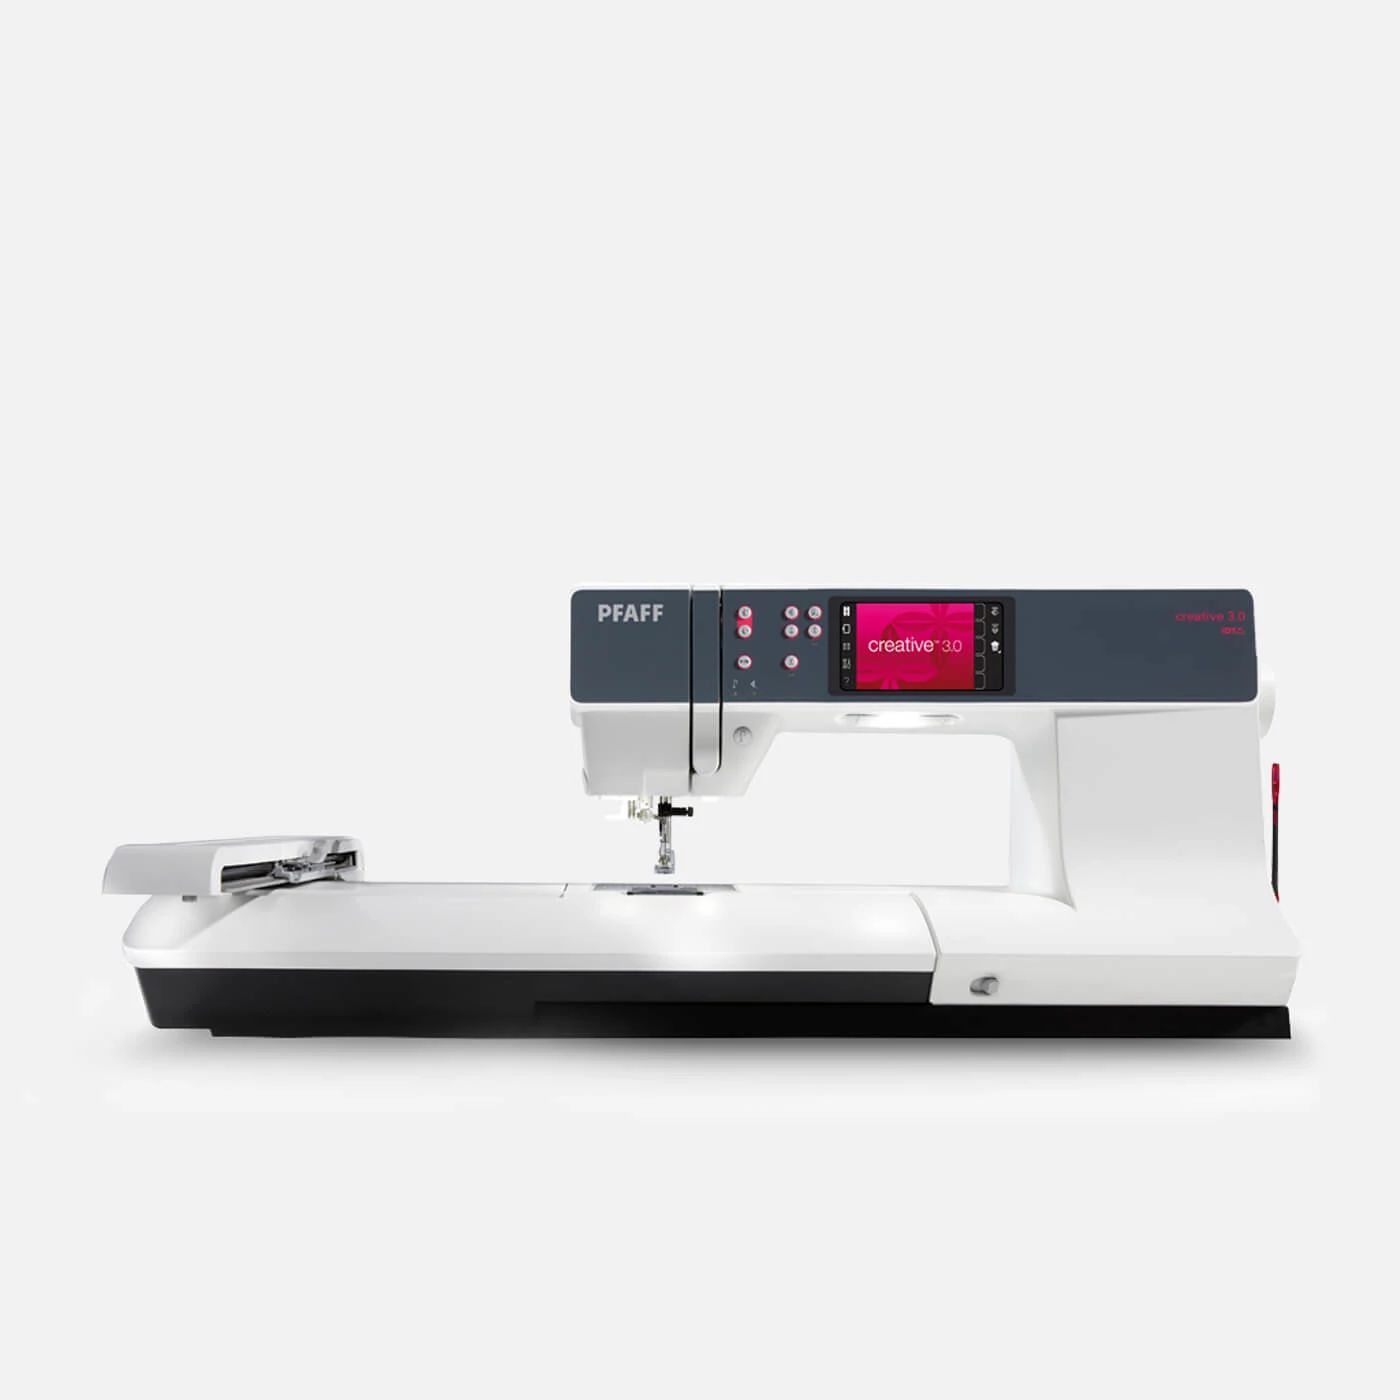 PFAFF creative 3.0 Sewing and Embroidery Machine for design